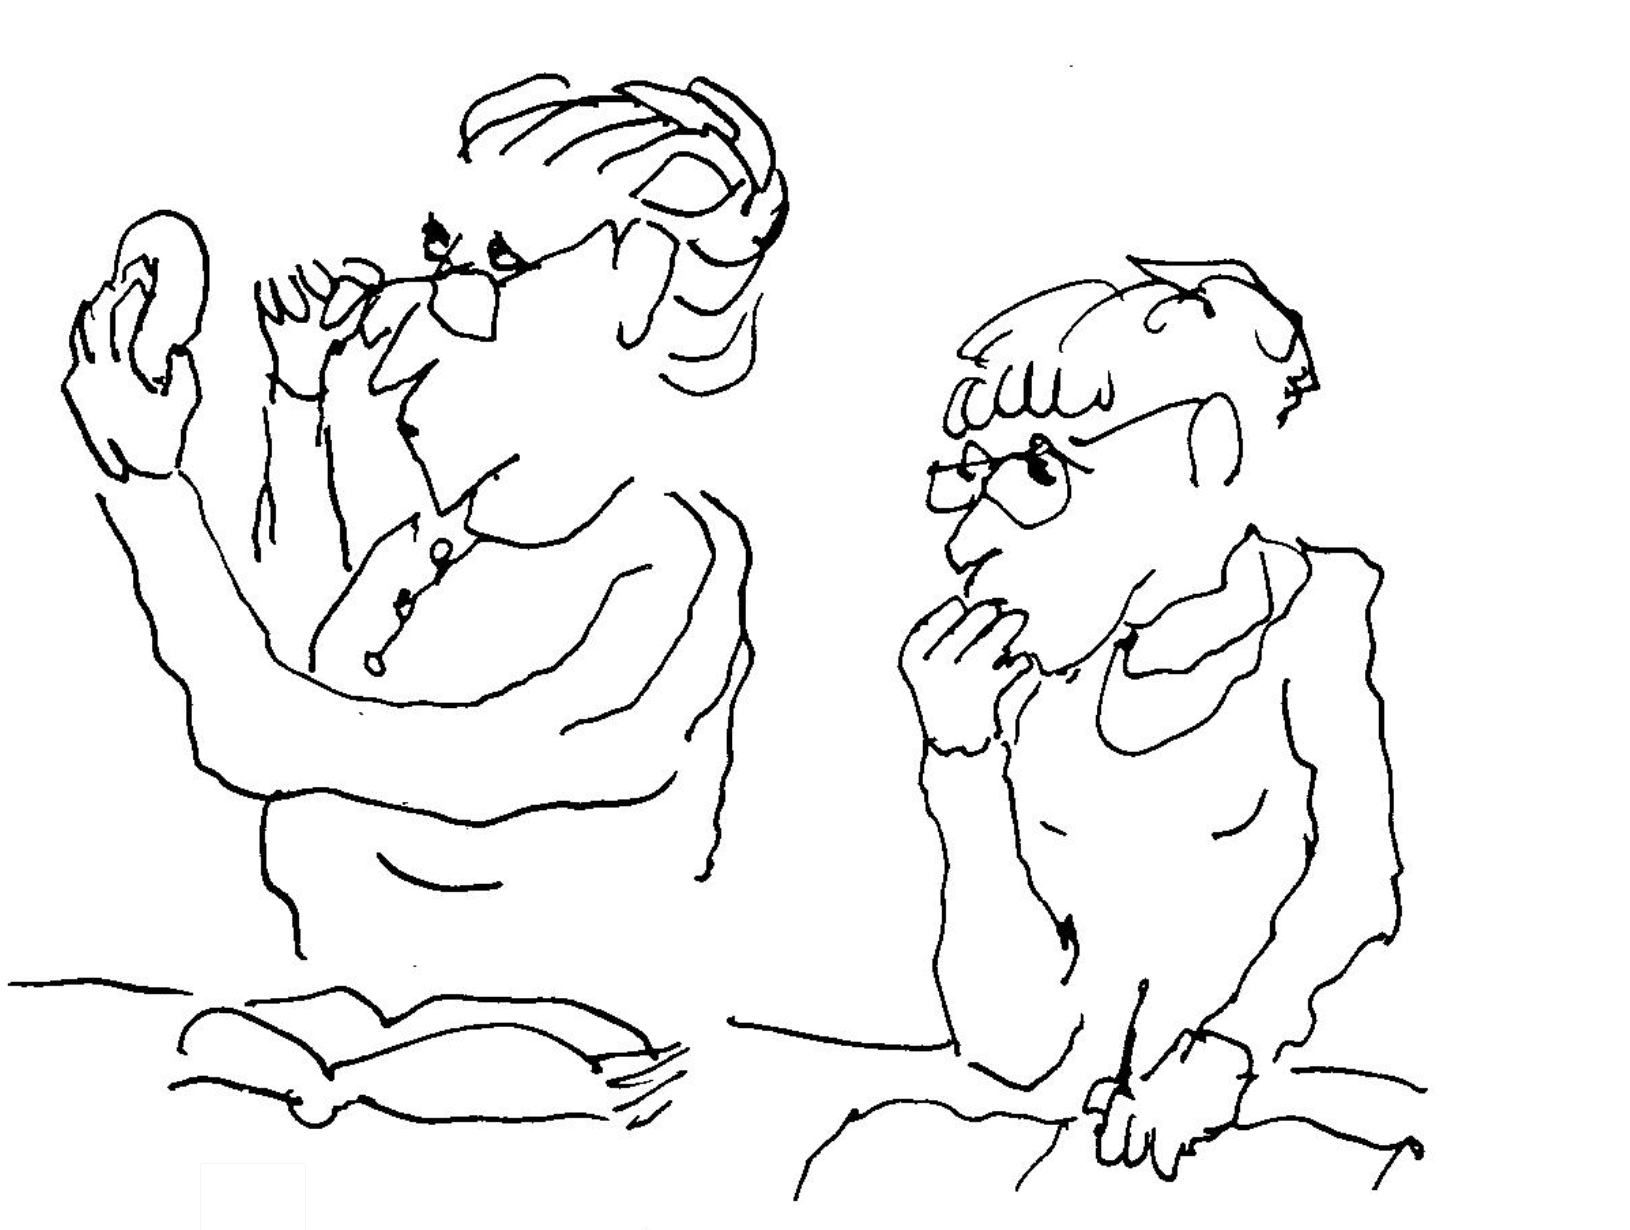 Helen Witty and Elizabeth Schneider Colchie during one of their many recipe conferences. Drawing by Carter Jones.